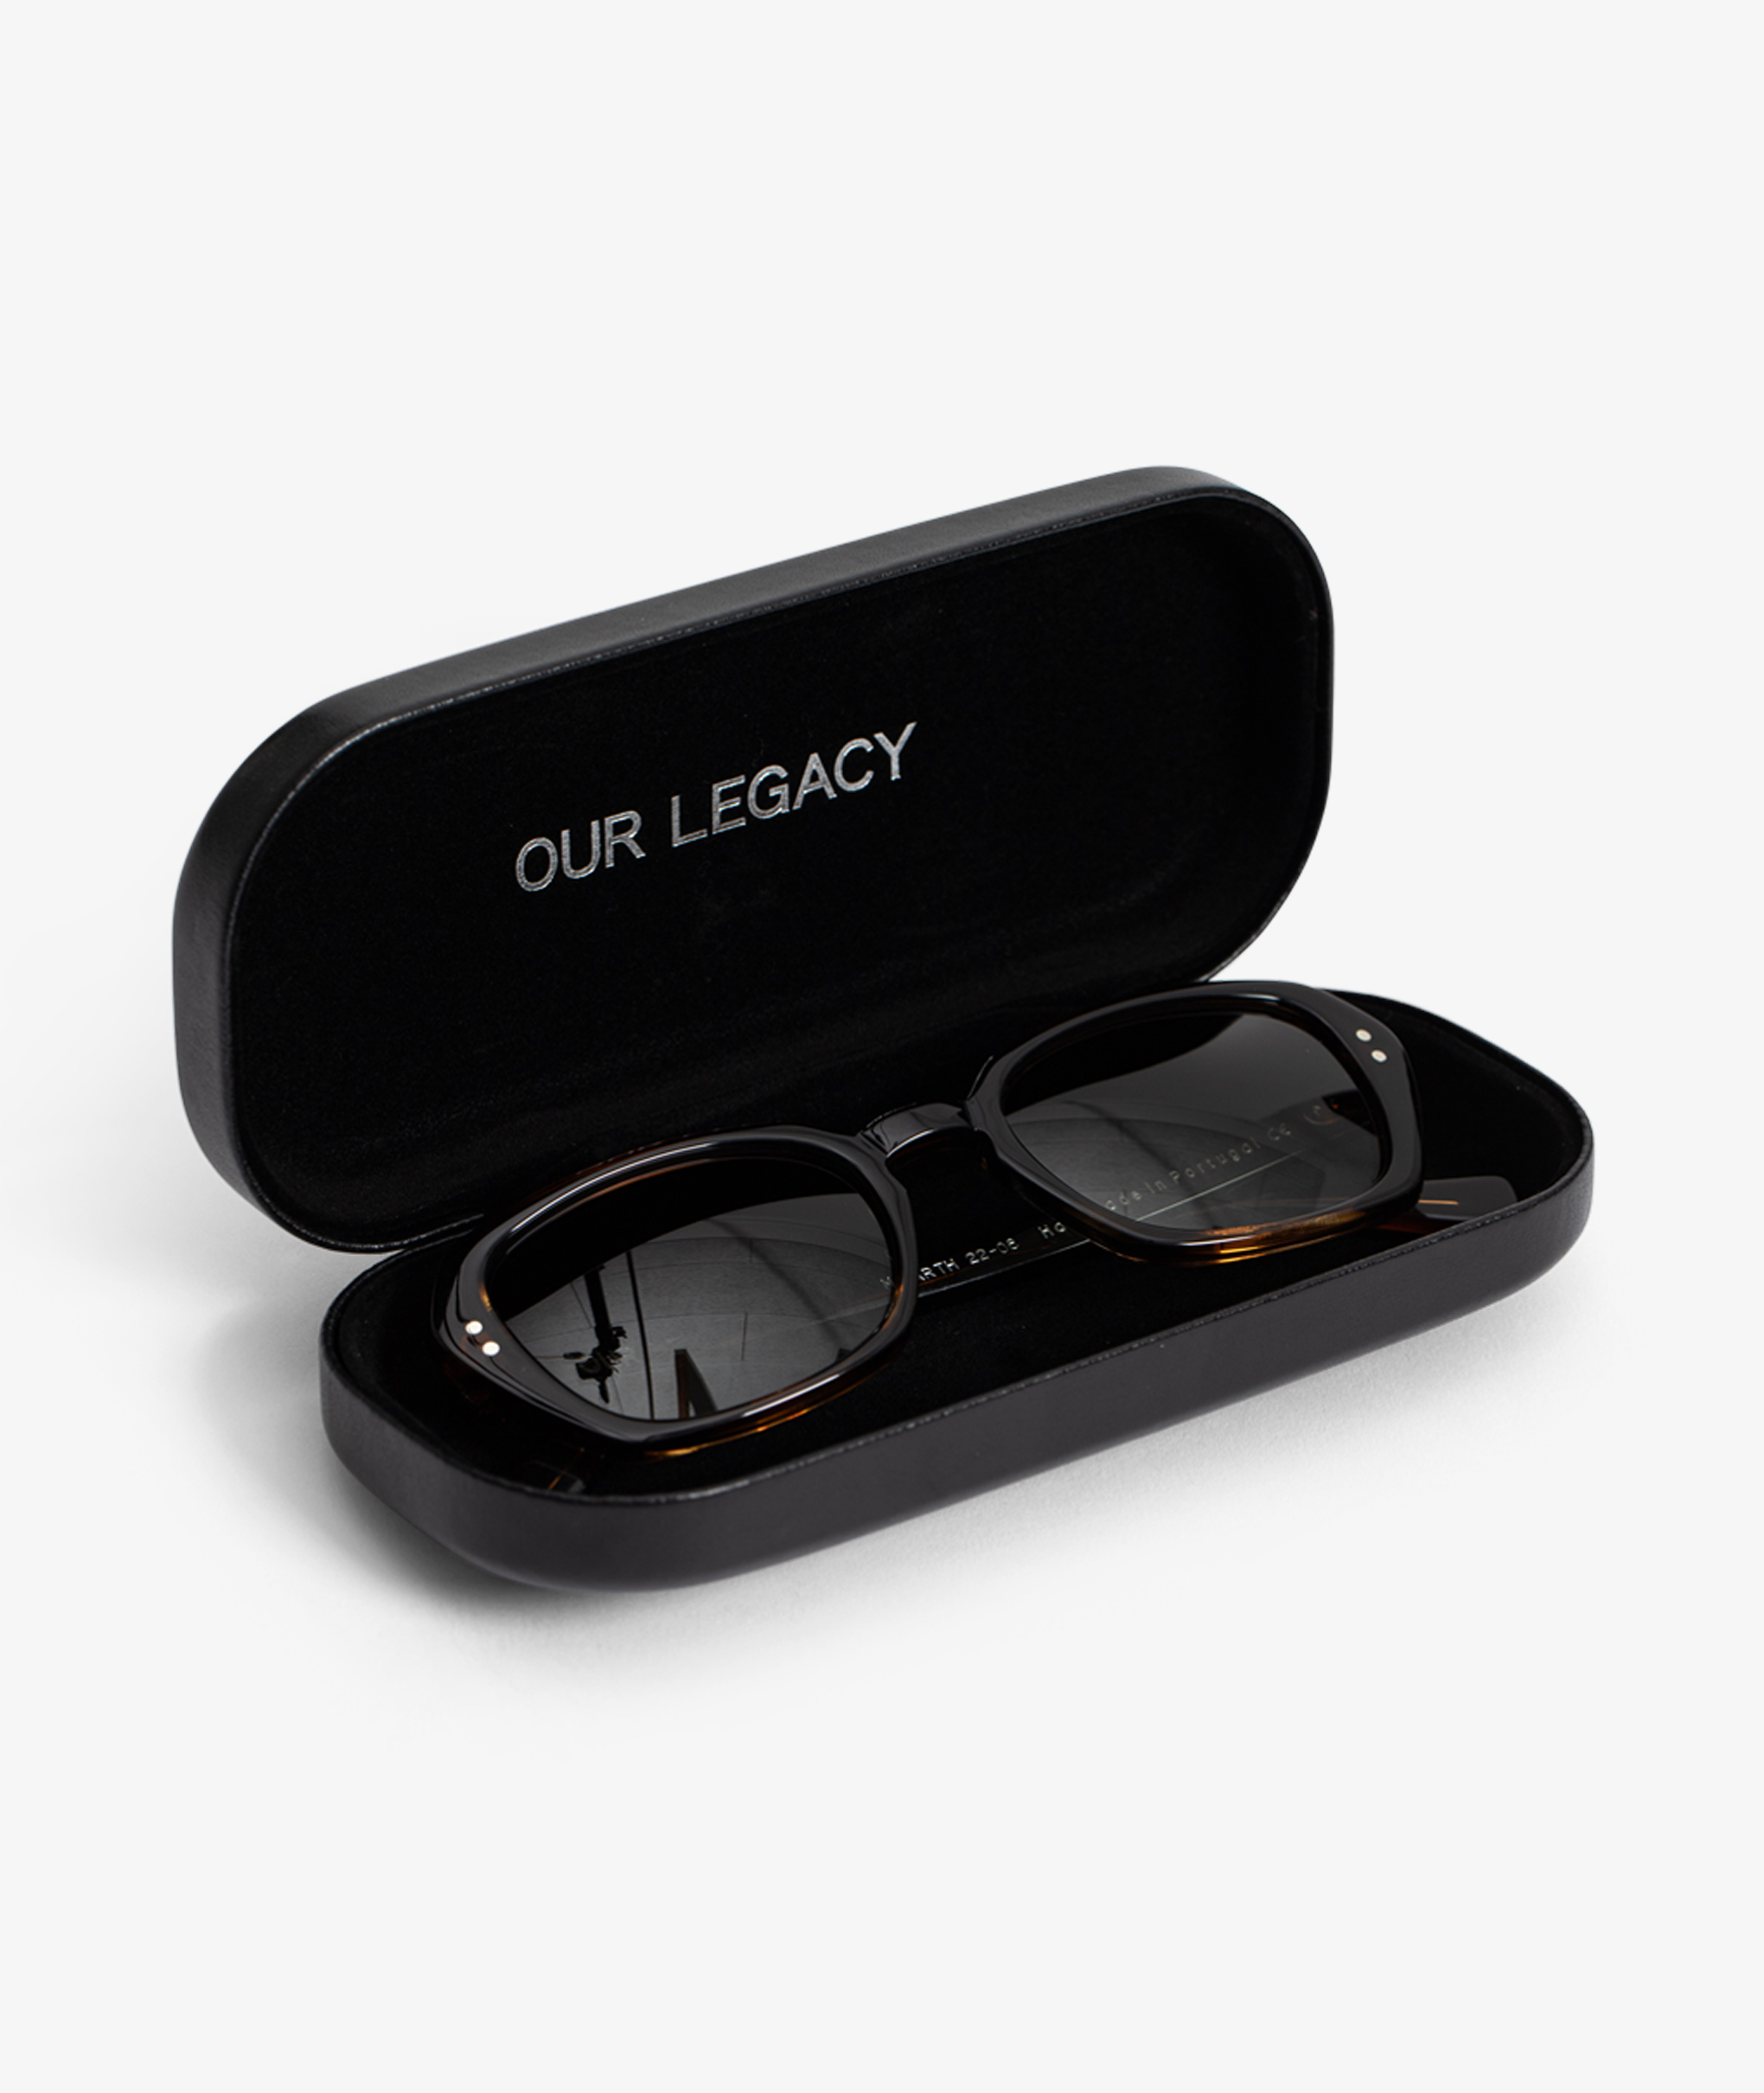 Norse Store | Shipping Worldwide - Our Legacy Earth Glasses - Shiny Brown